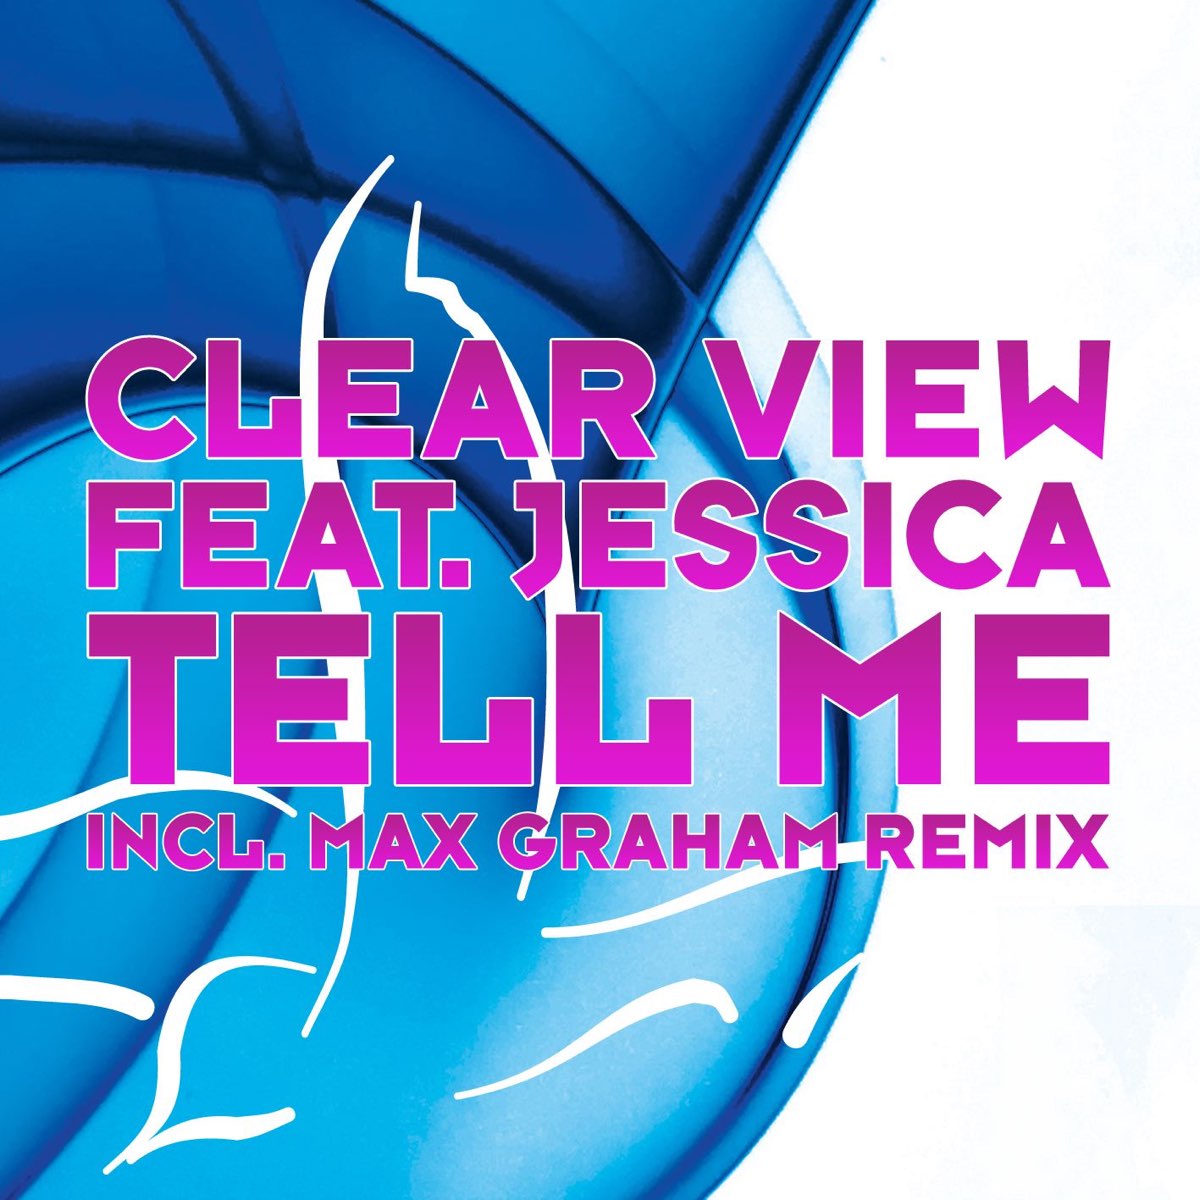 Feat jess. Tell me. Музыка tell me. Markus Schulz & Max Graham feat. Jessica Riddle облжка. Cleared Remix.